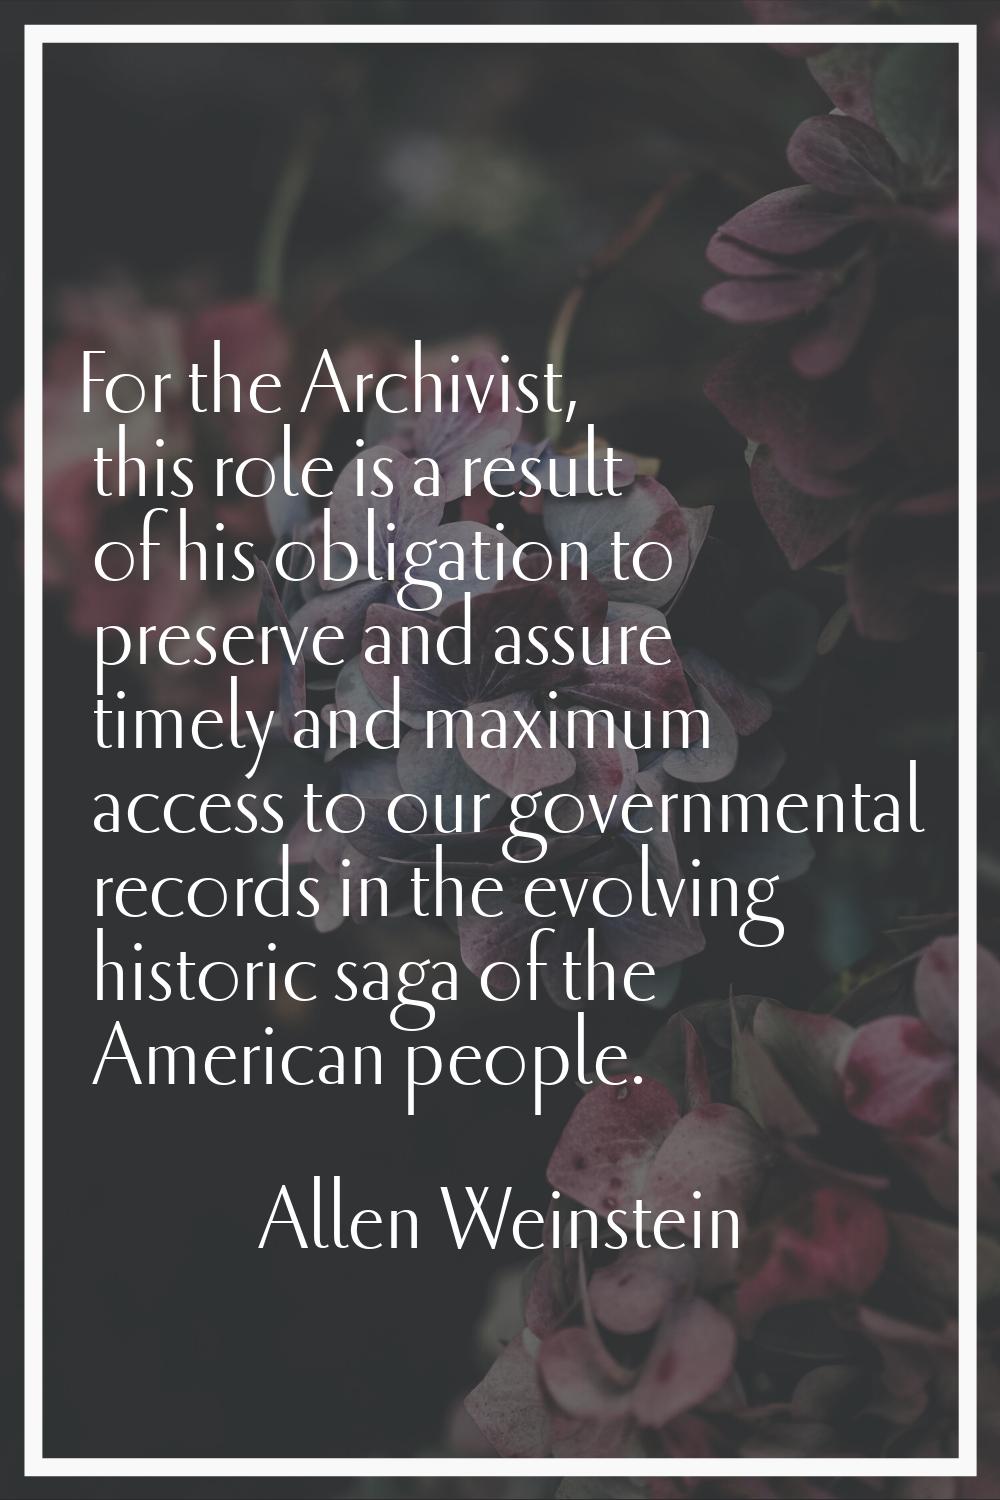 For the Archivist, this role is a result of his obligation to preserve and assure timely and maximu